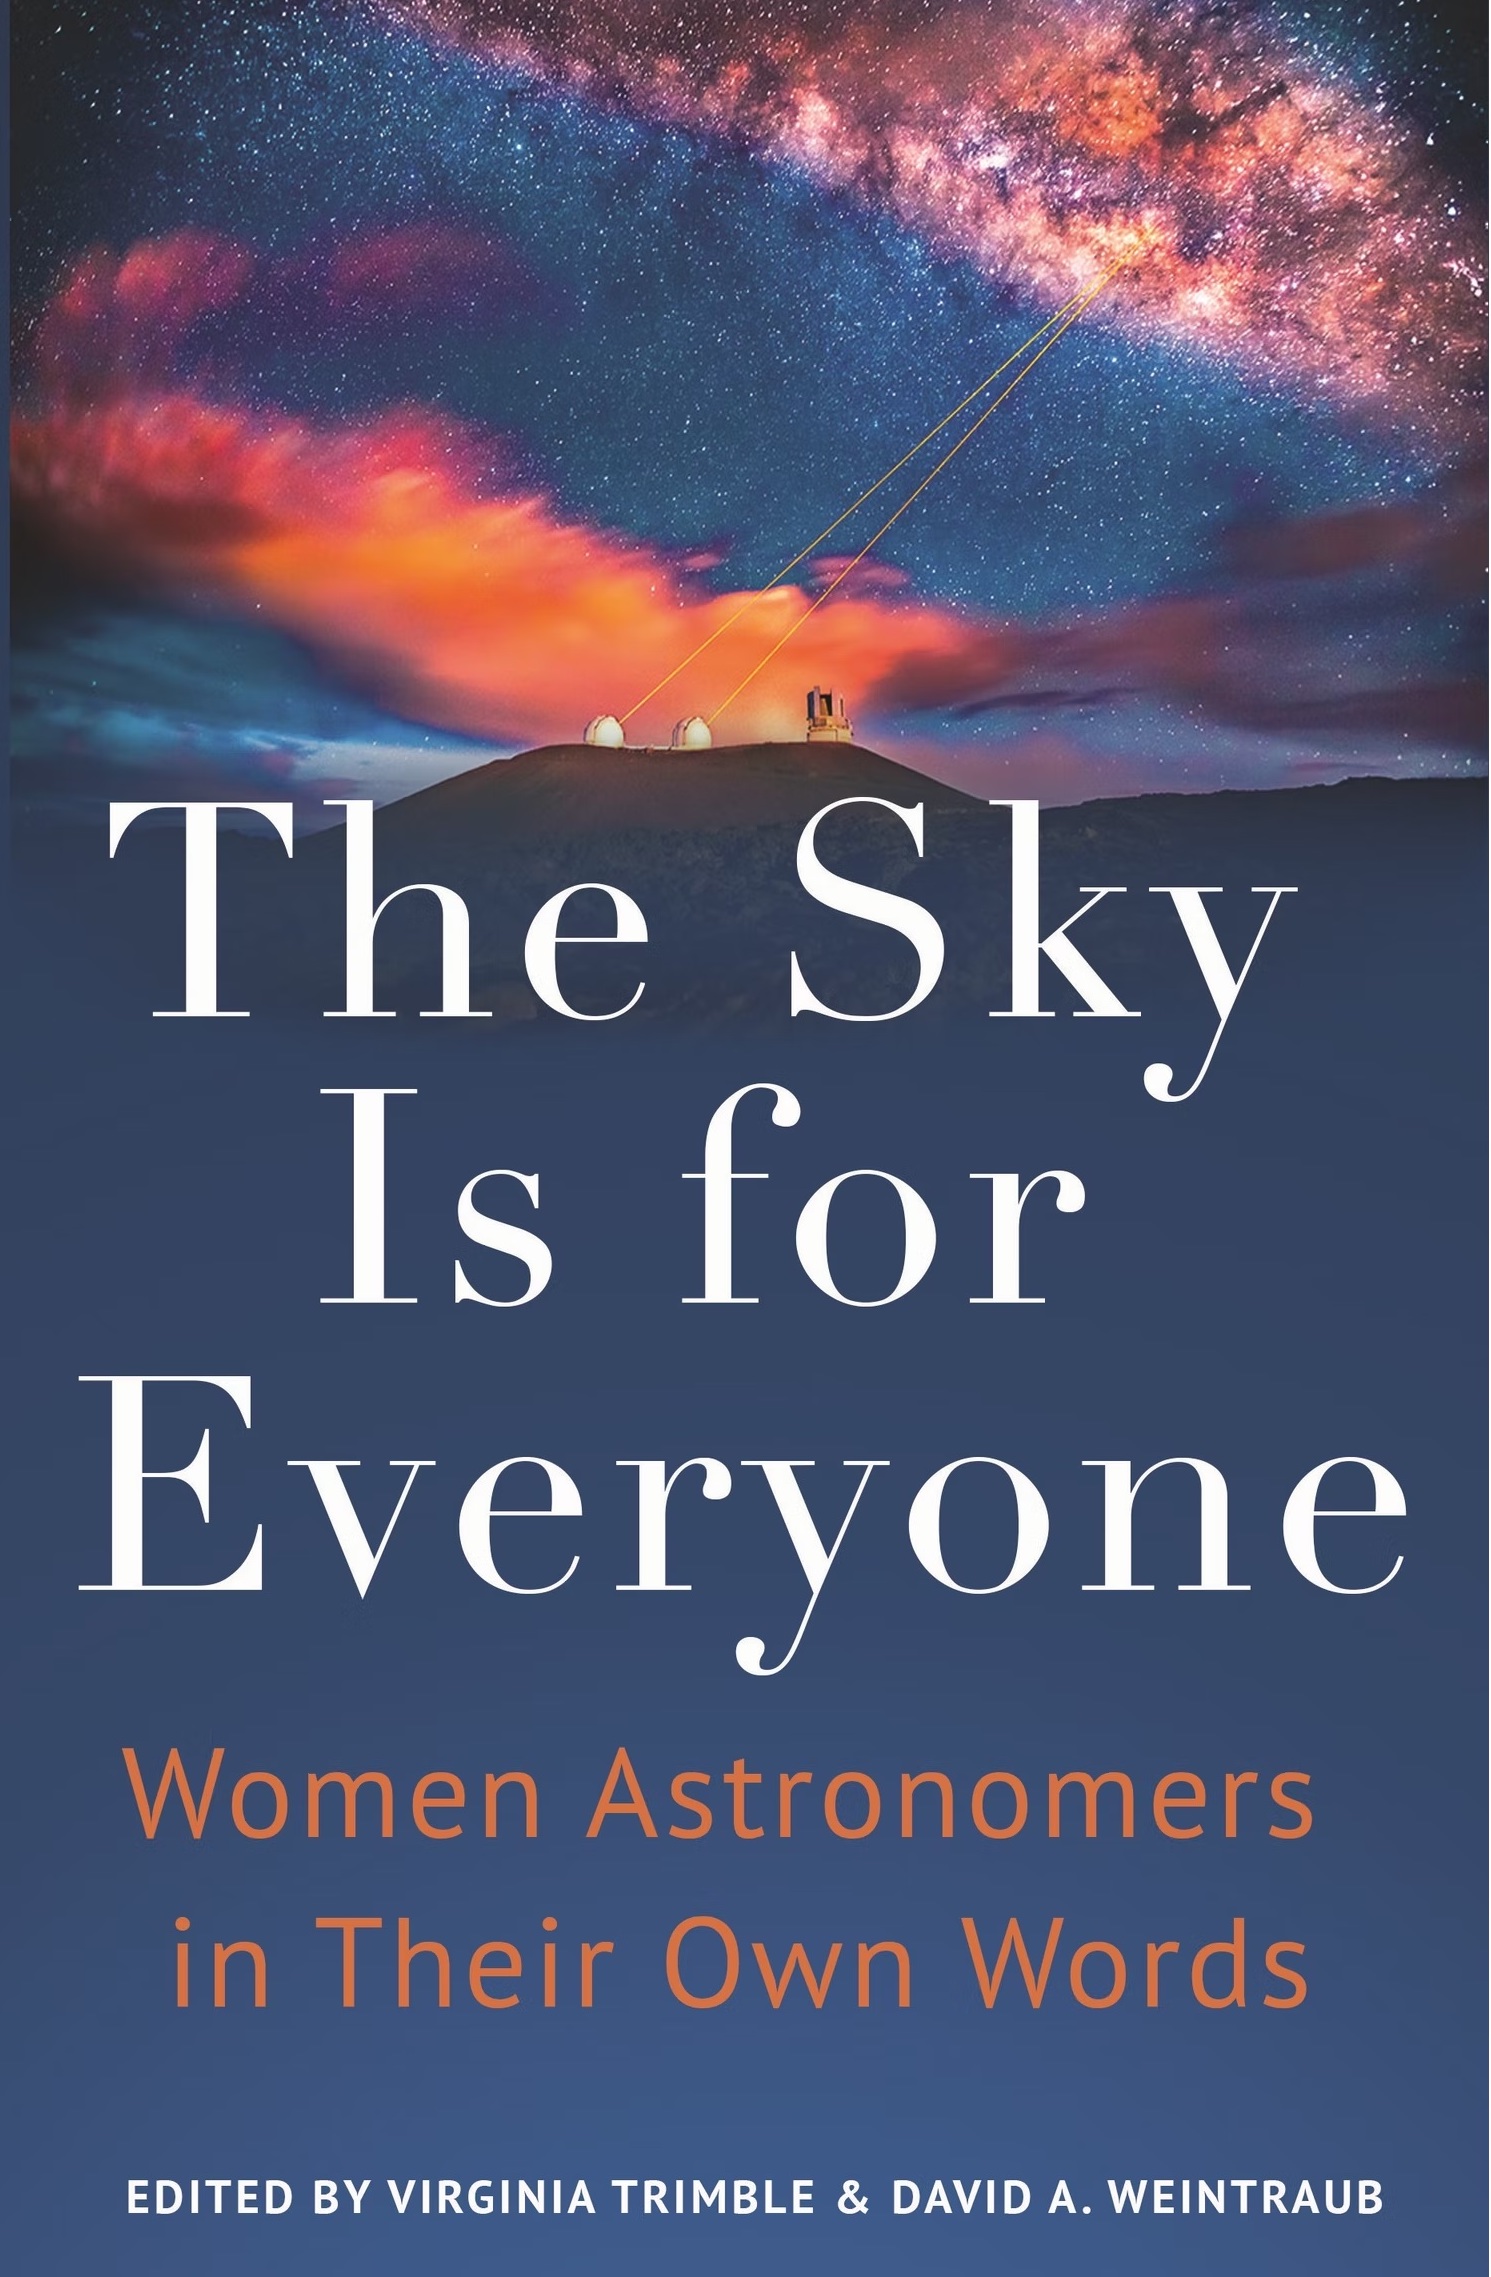 International book “The Sky is for Everyone: Women Astronomers in Their Own Words.”